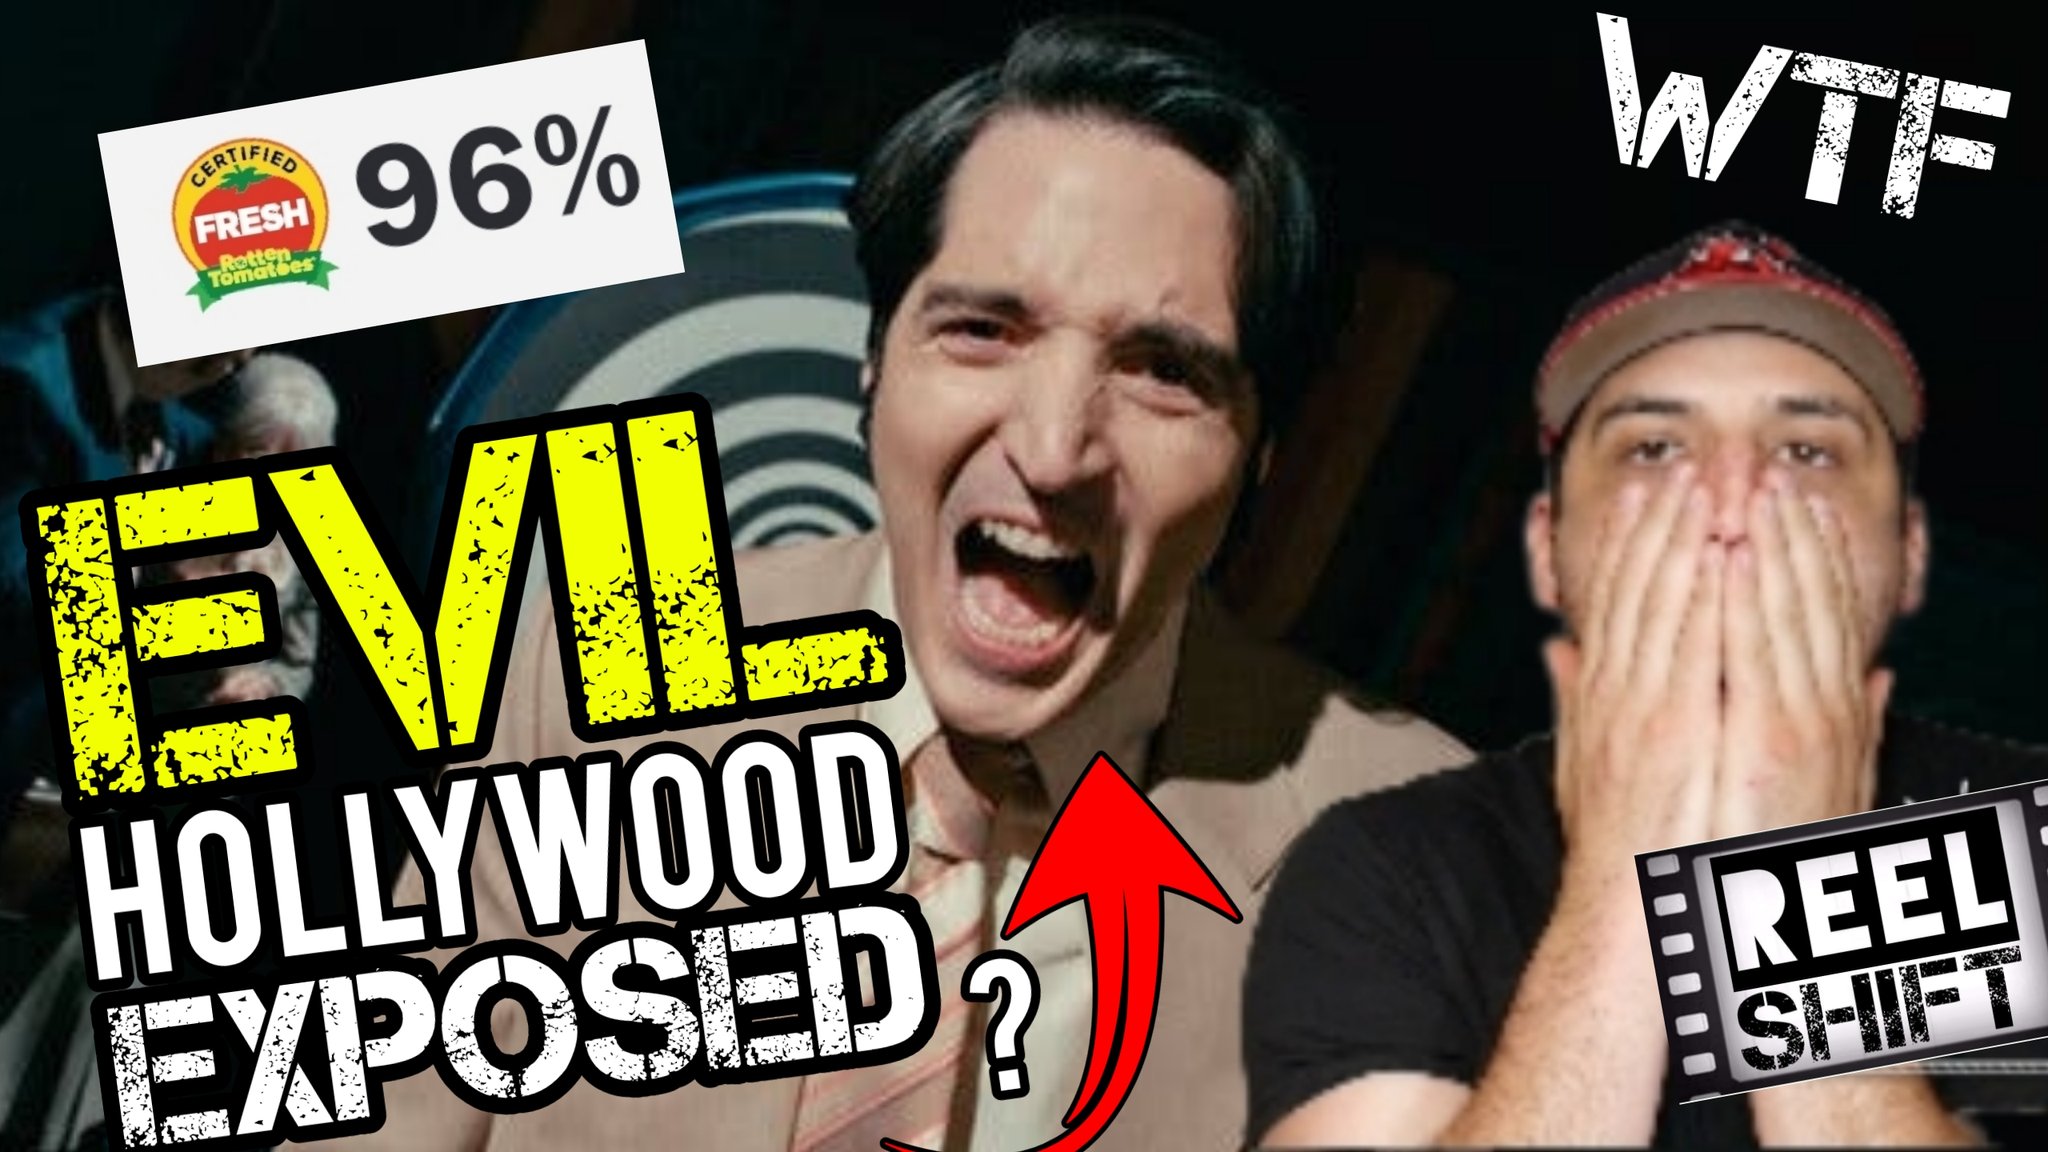 REEL SHIFT on X: NEW VIDEO #LateNightWithTheDevil Exposes EVIL Hollywood?  Finally a horror movie with something to say! #ReelShift #horror  #horrormovie   / X